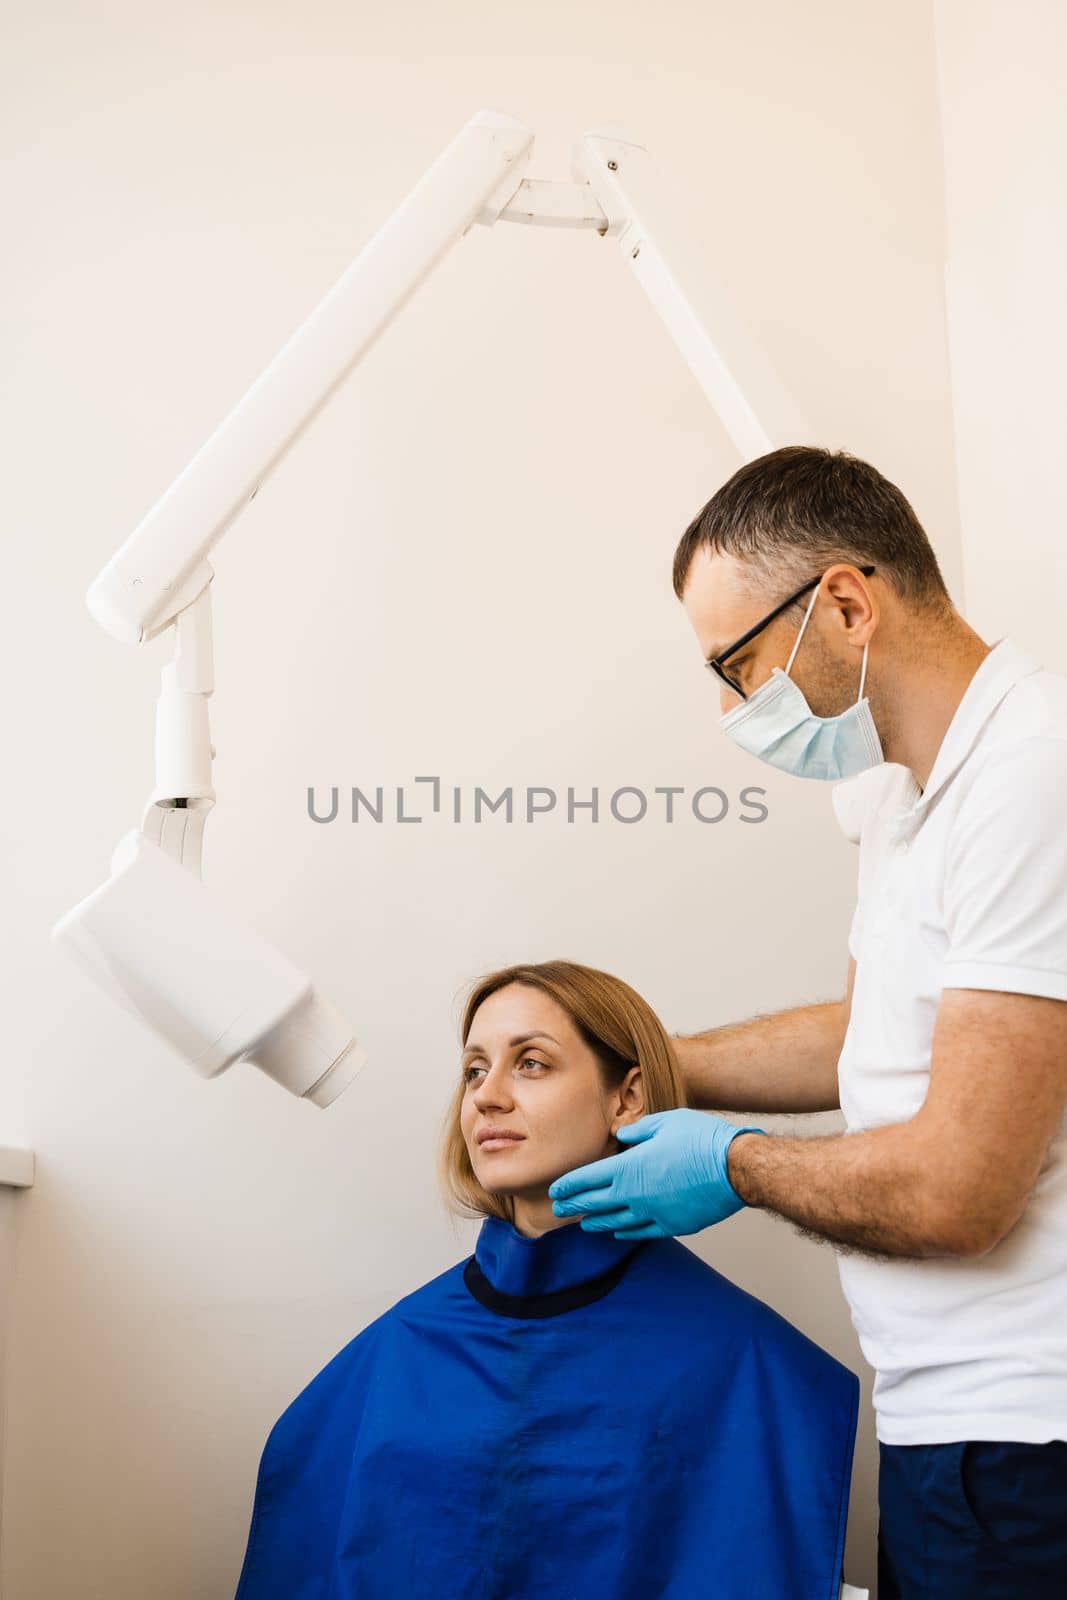 Teeth x ray scanning for detect toothache and treat roots. Dentist do x-ray tooth scan for woman in dentistry